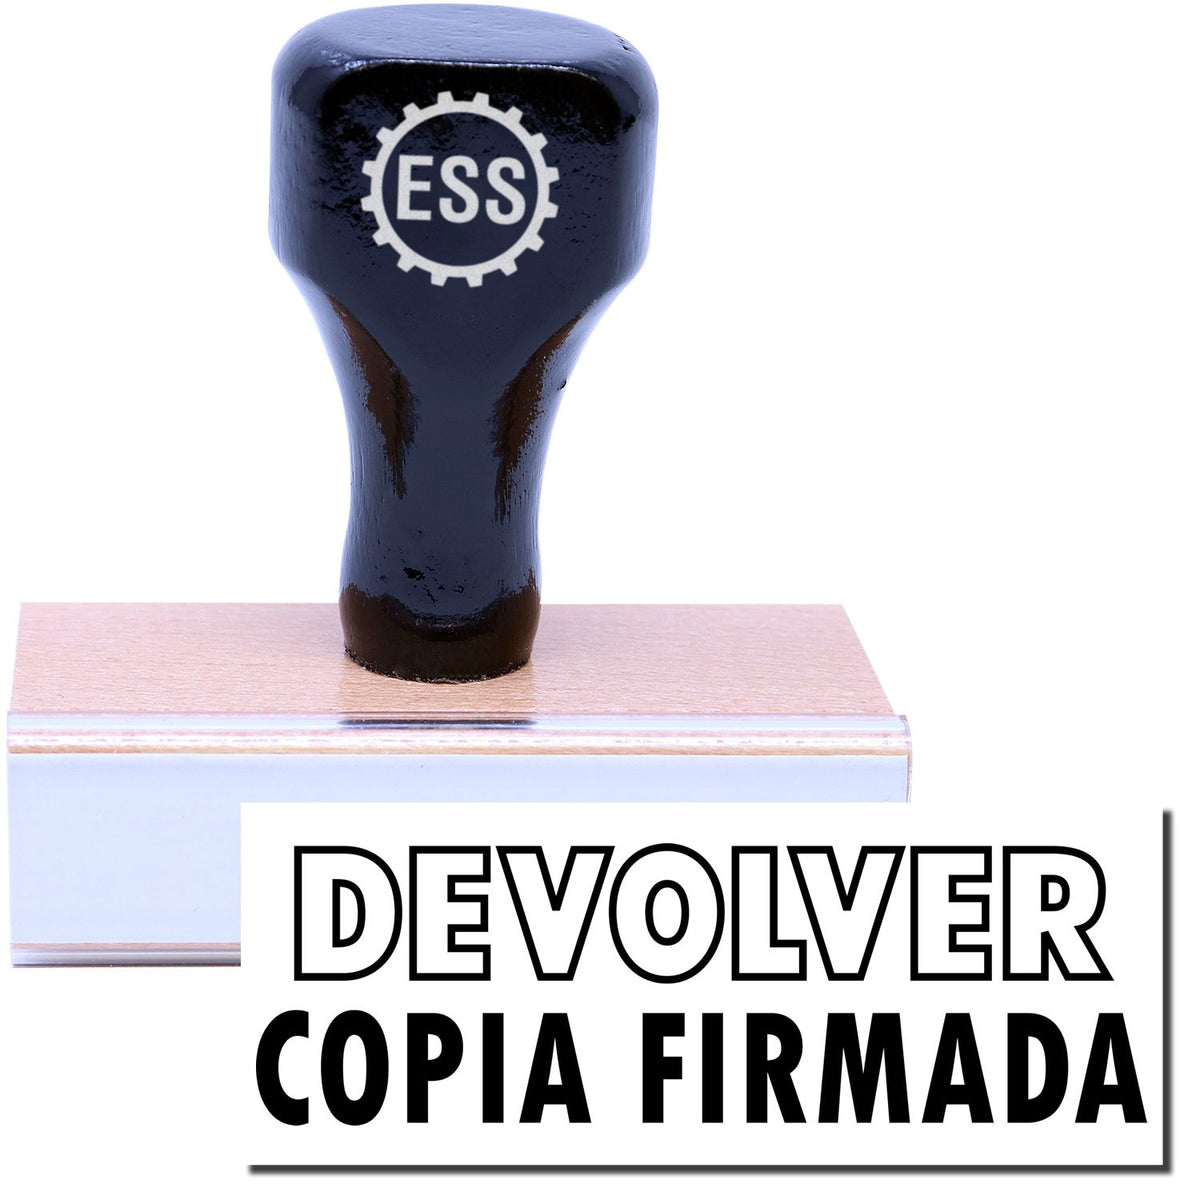 A stock office rubber stamp with a stamped image showing how the text &quot;DEVOLVER COPIA FIRMADA&quot; (&quot;DEVOLVER&quot; in an outline font) is displayed after stamping.